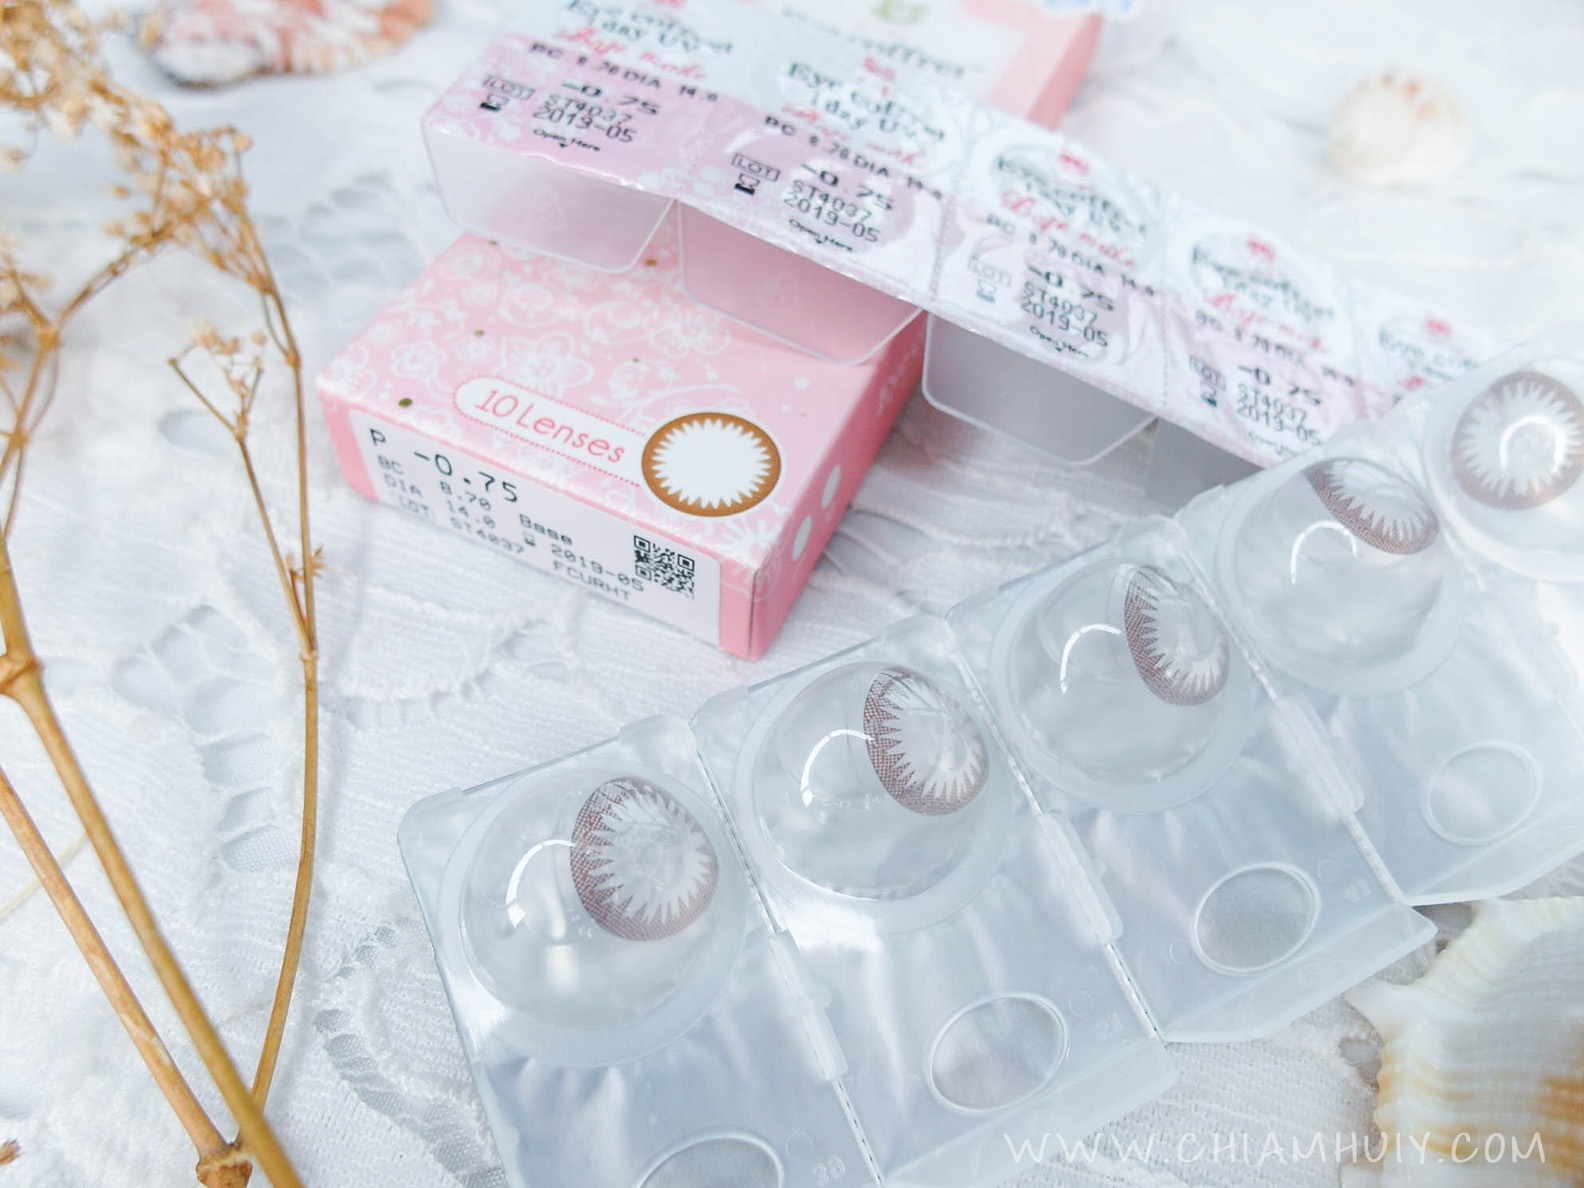 SEED Eye Coffret Cosmetic Contact Lenses Review Celine